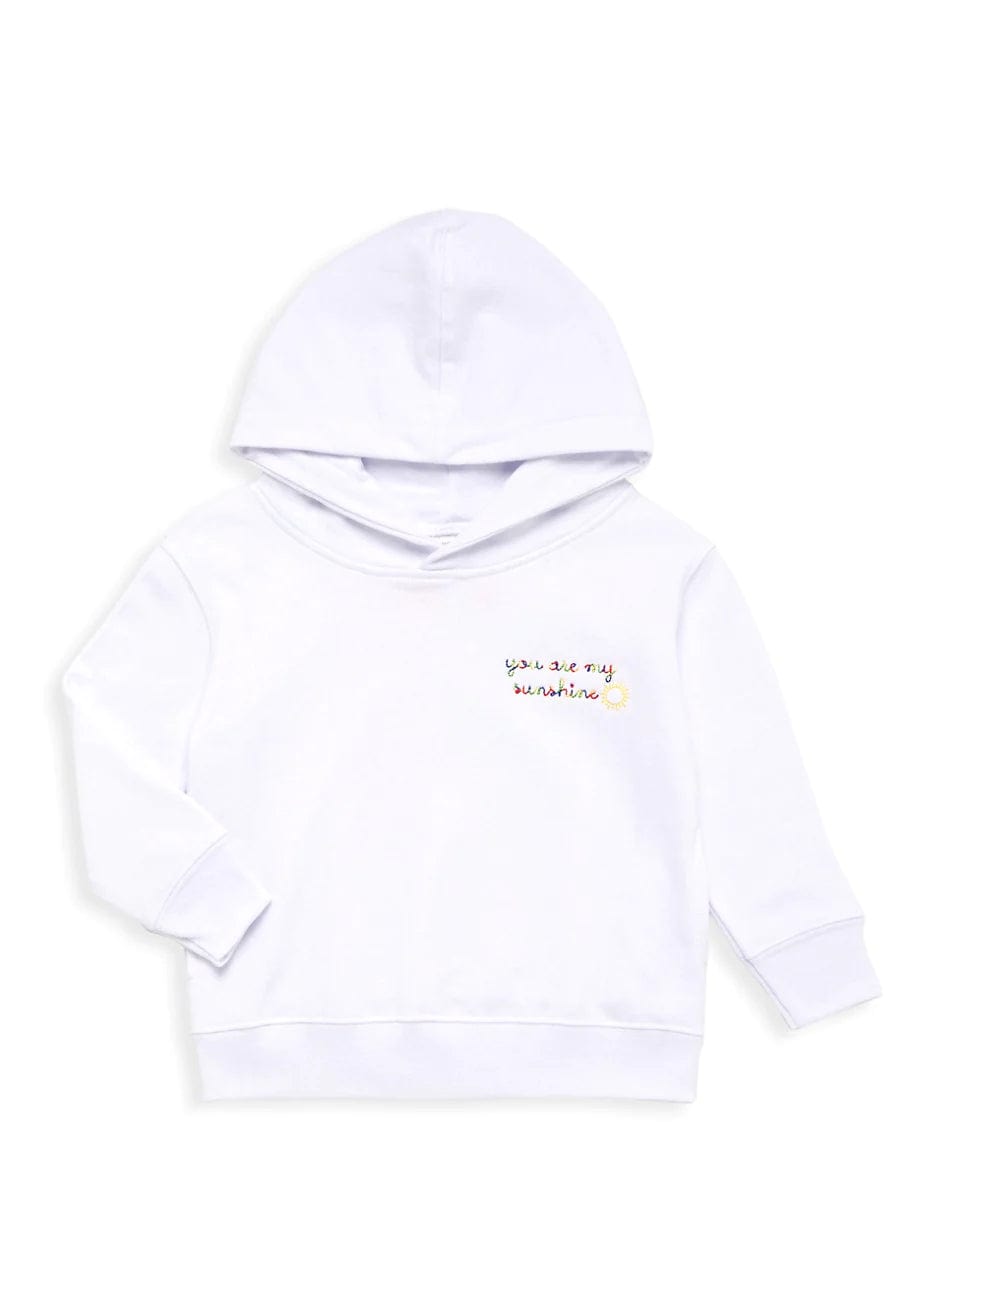 juju + stitch Personalized Custom Embroidered 2T / White "you are my sunshine" Baby + Little Kid Pullover Hoodie